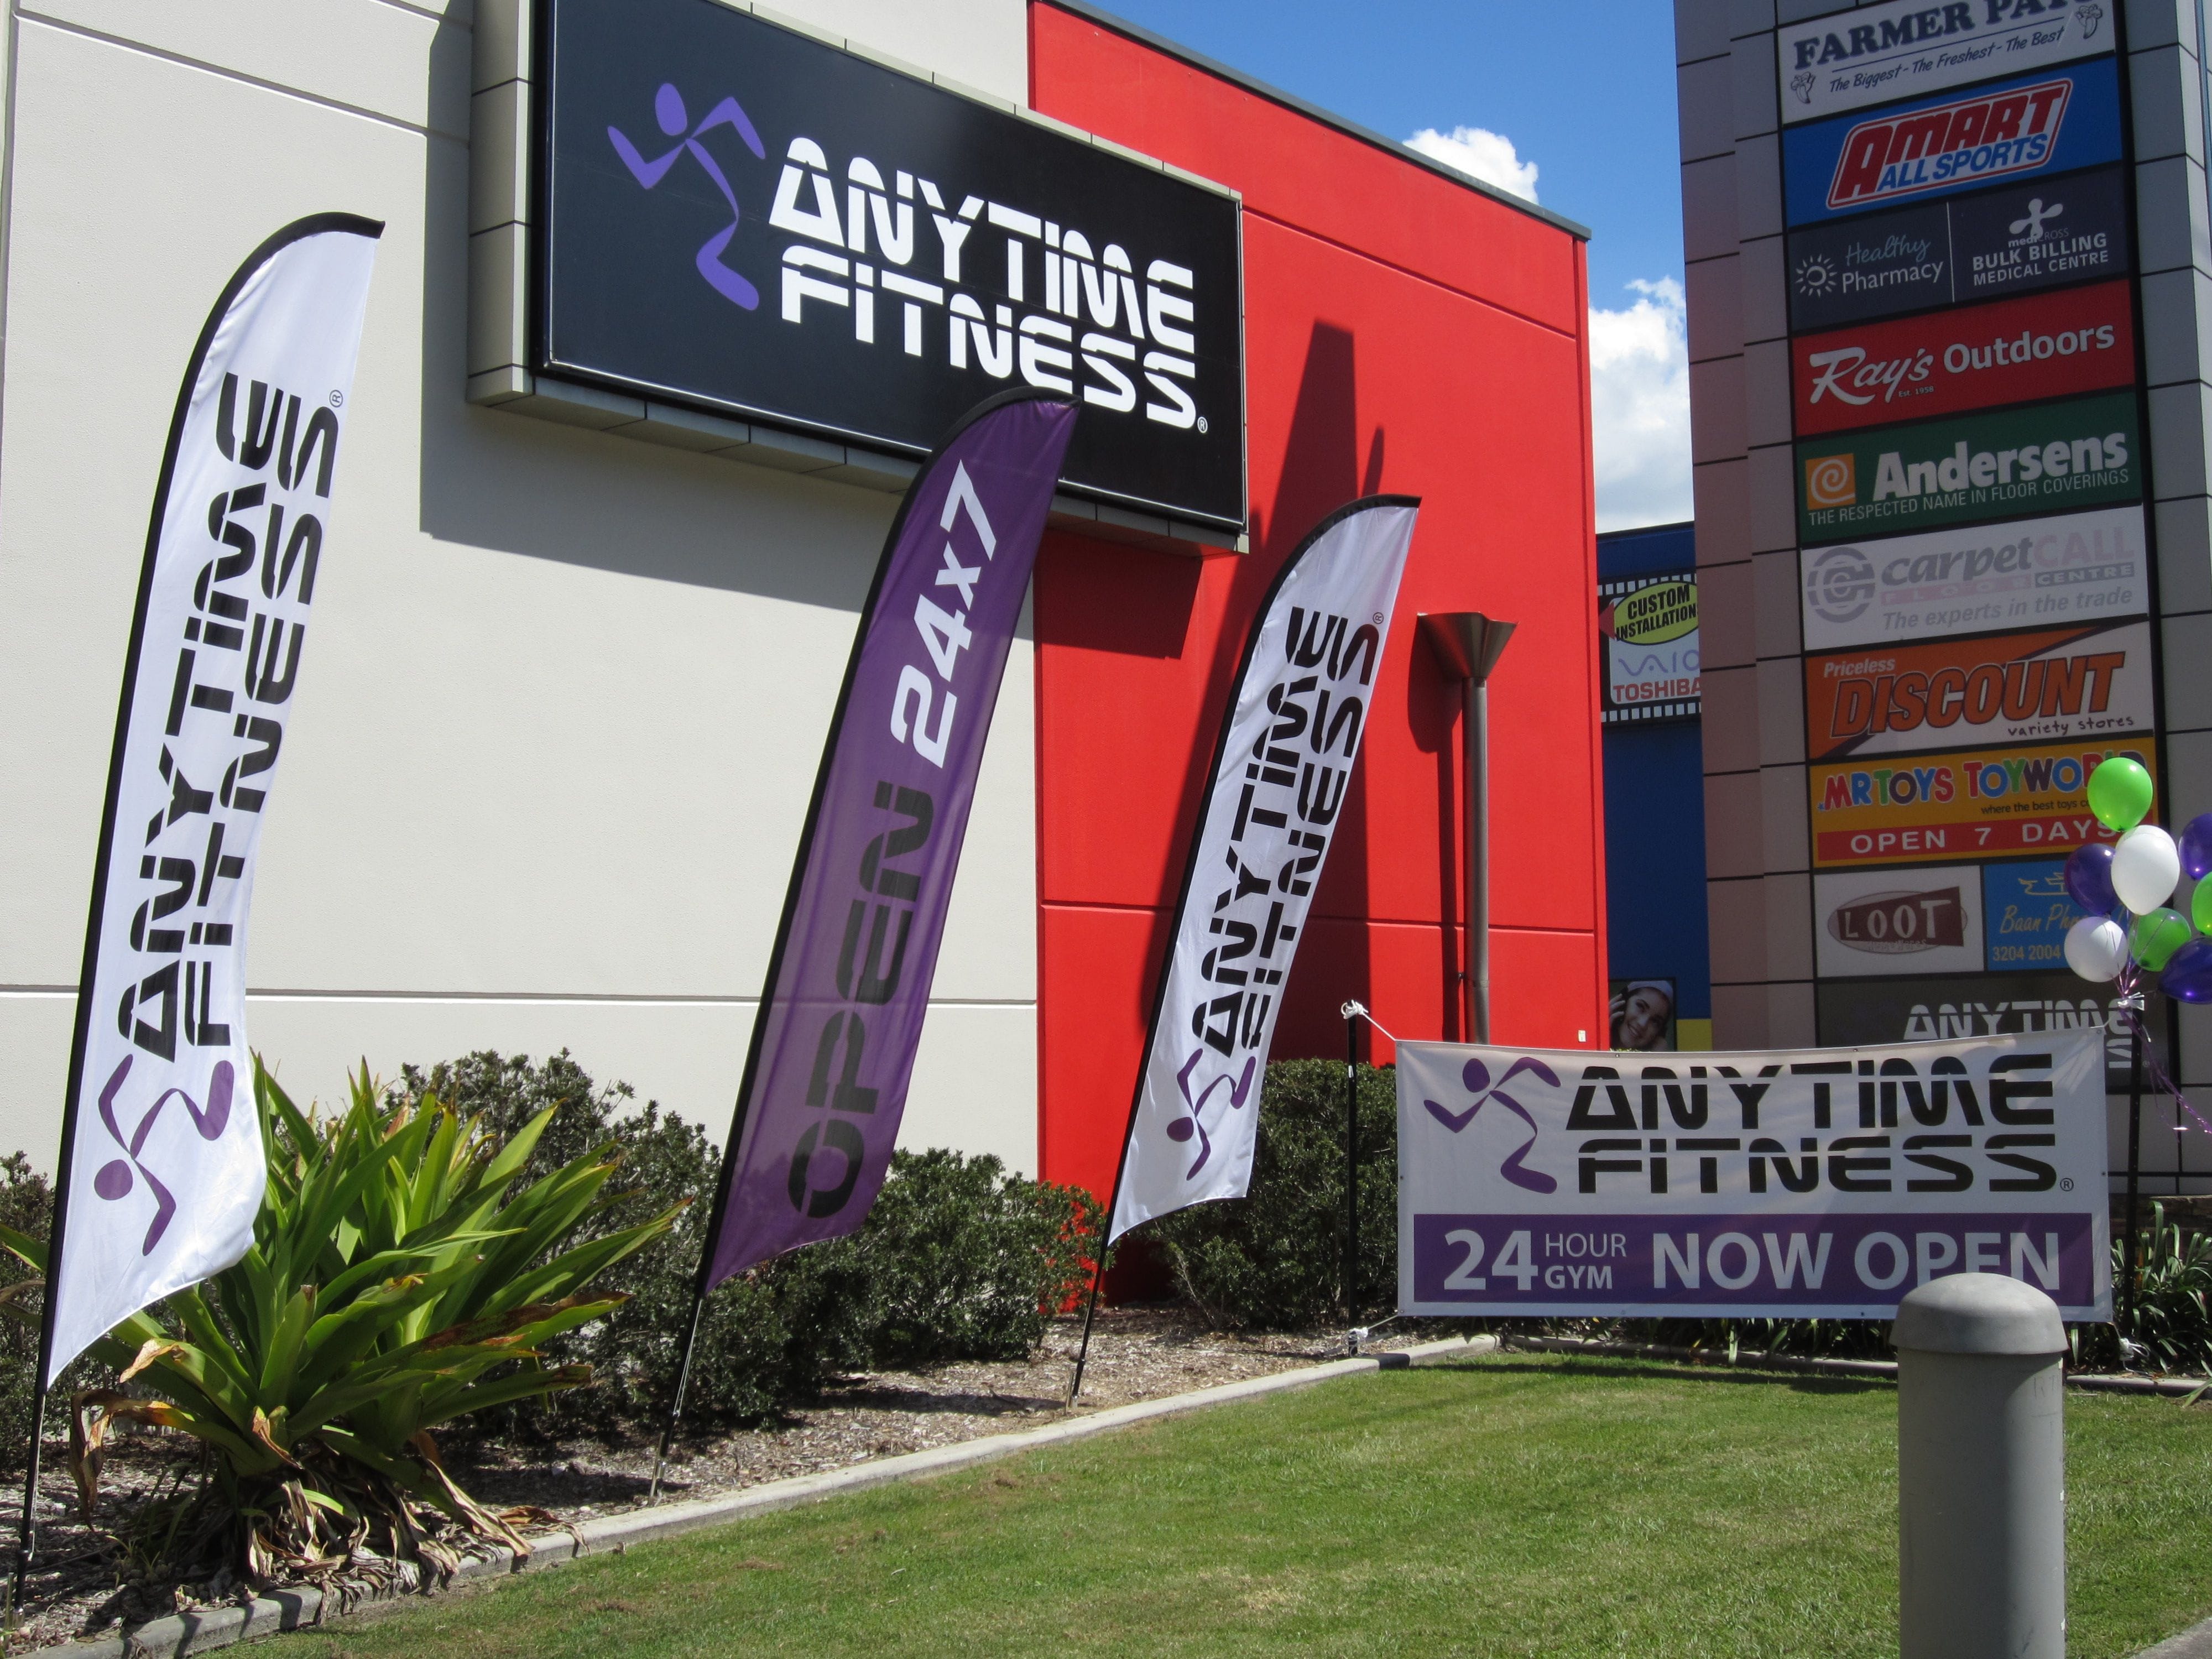 Anytime fitness feather flags by Expolite